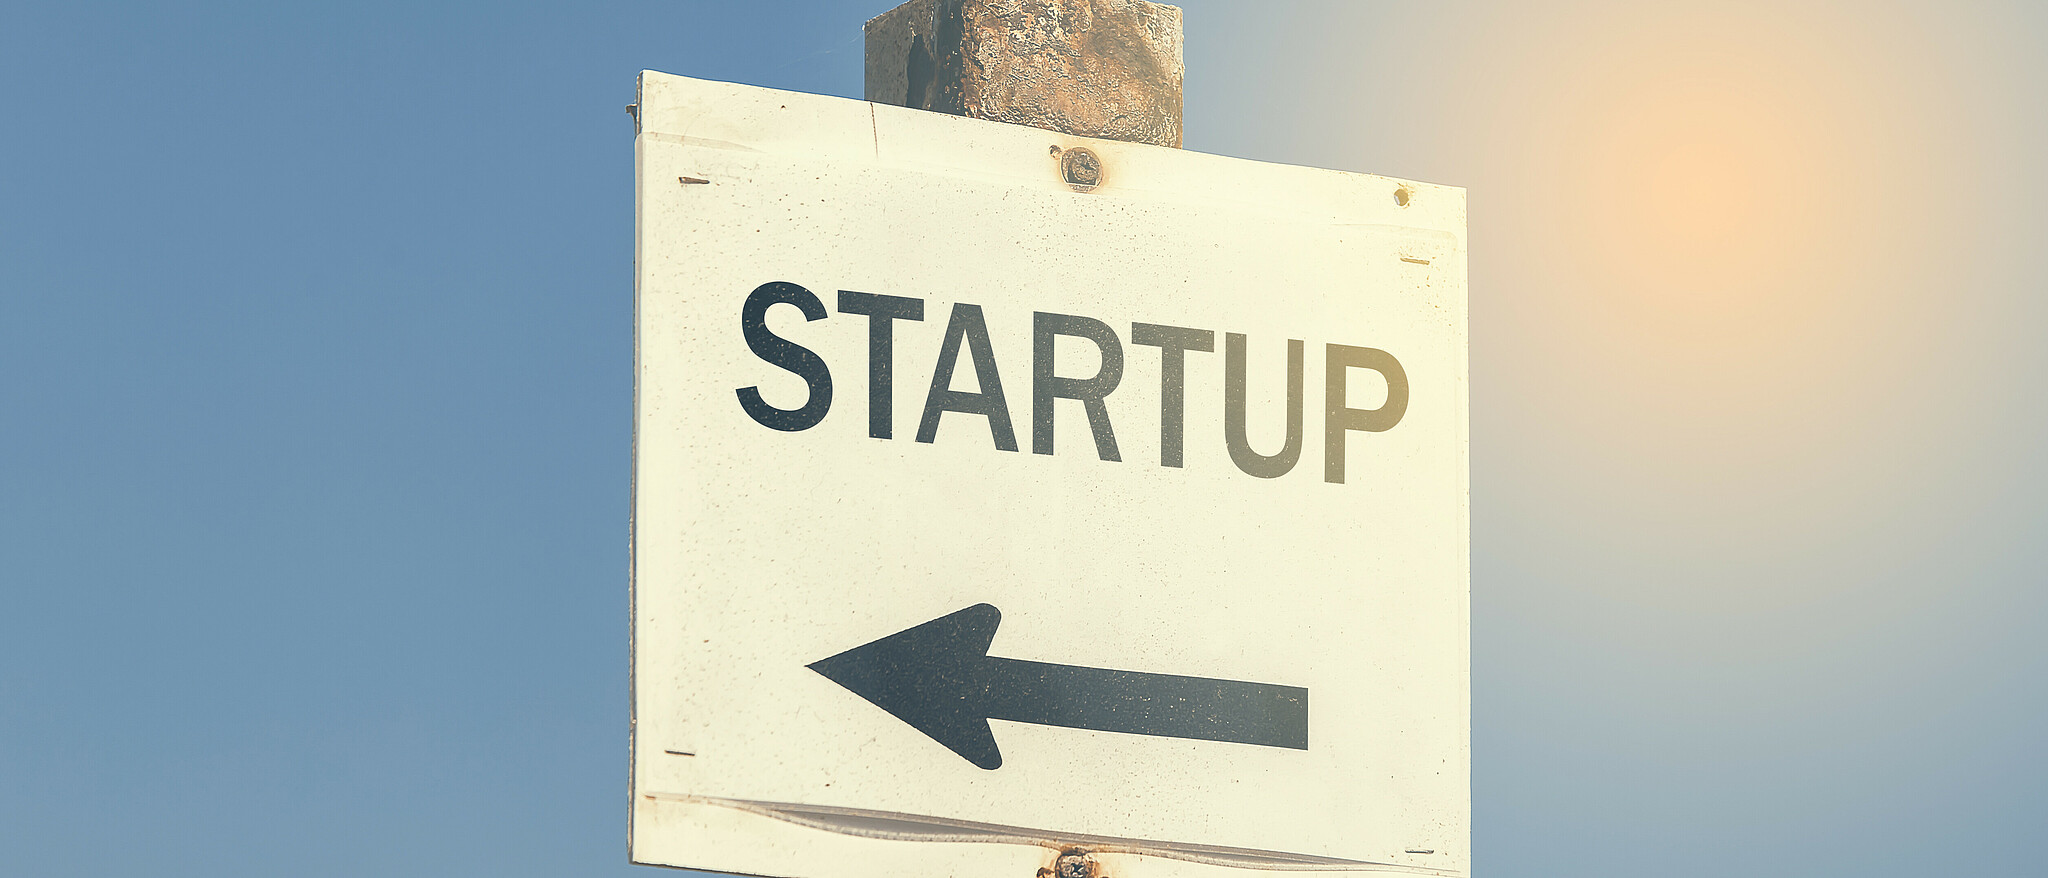 A sign that says "Startup" with an arrow pointing to the left.